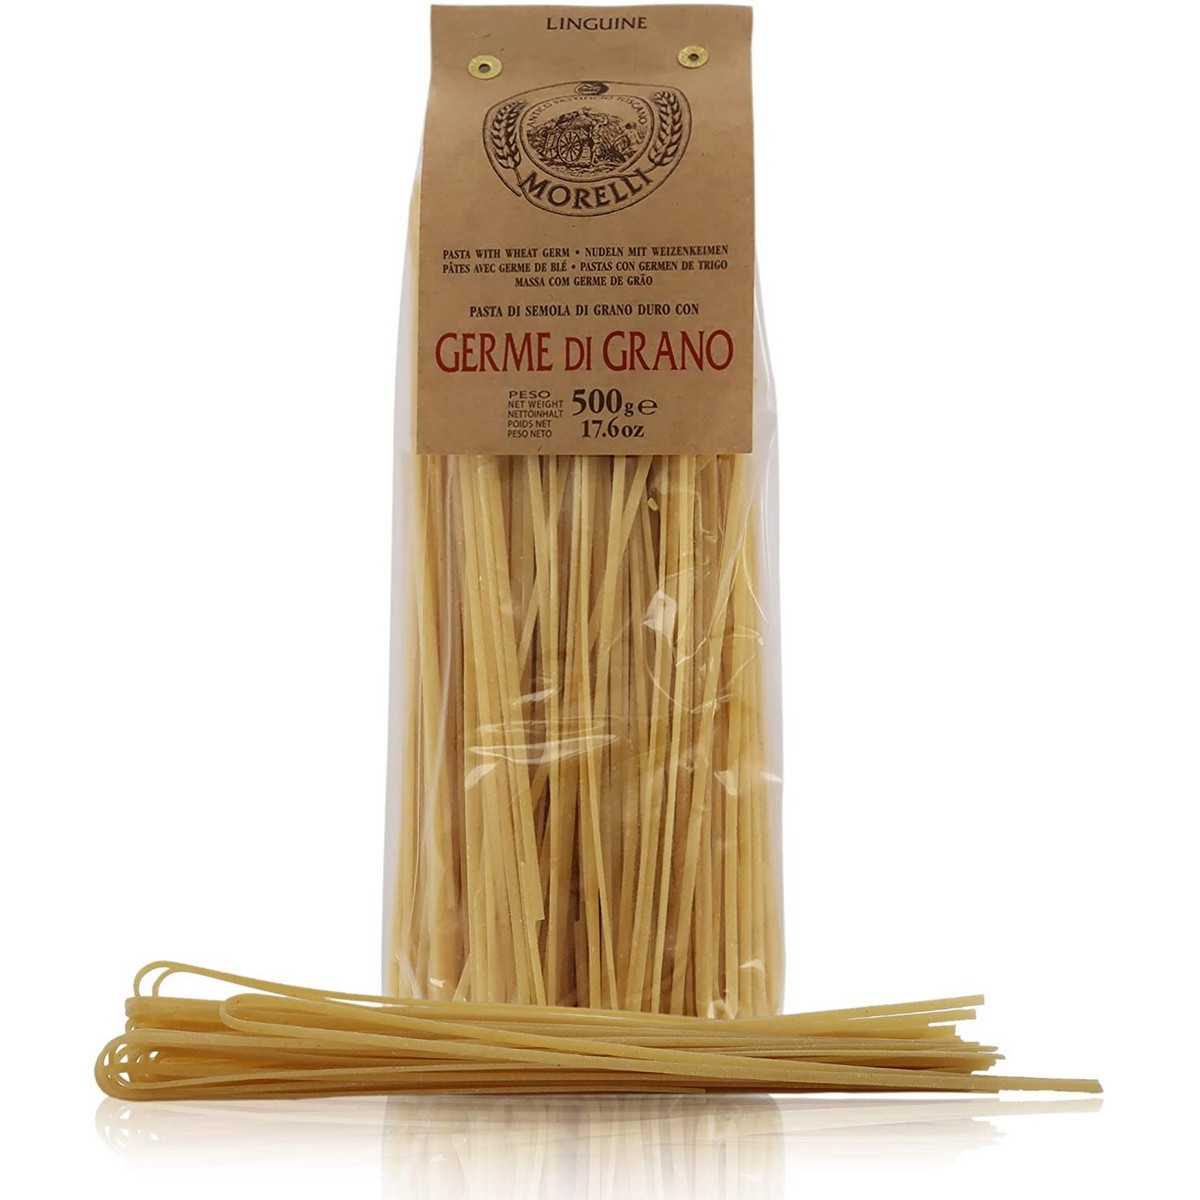 pasta with wheat germ - linguine - 500 g